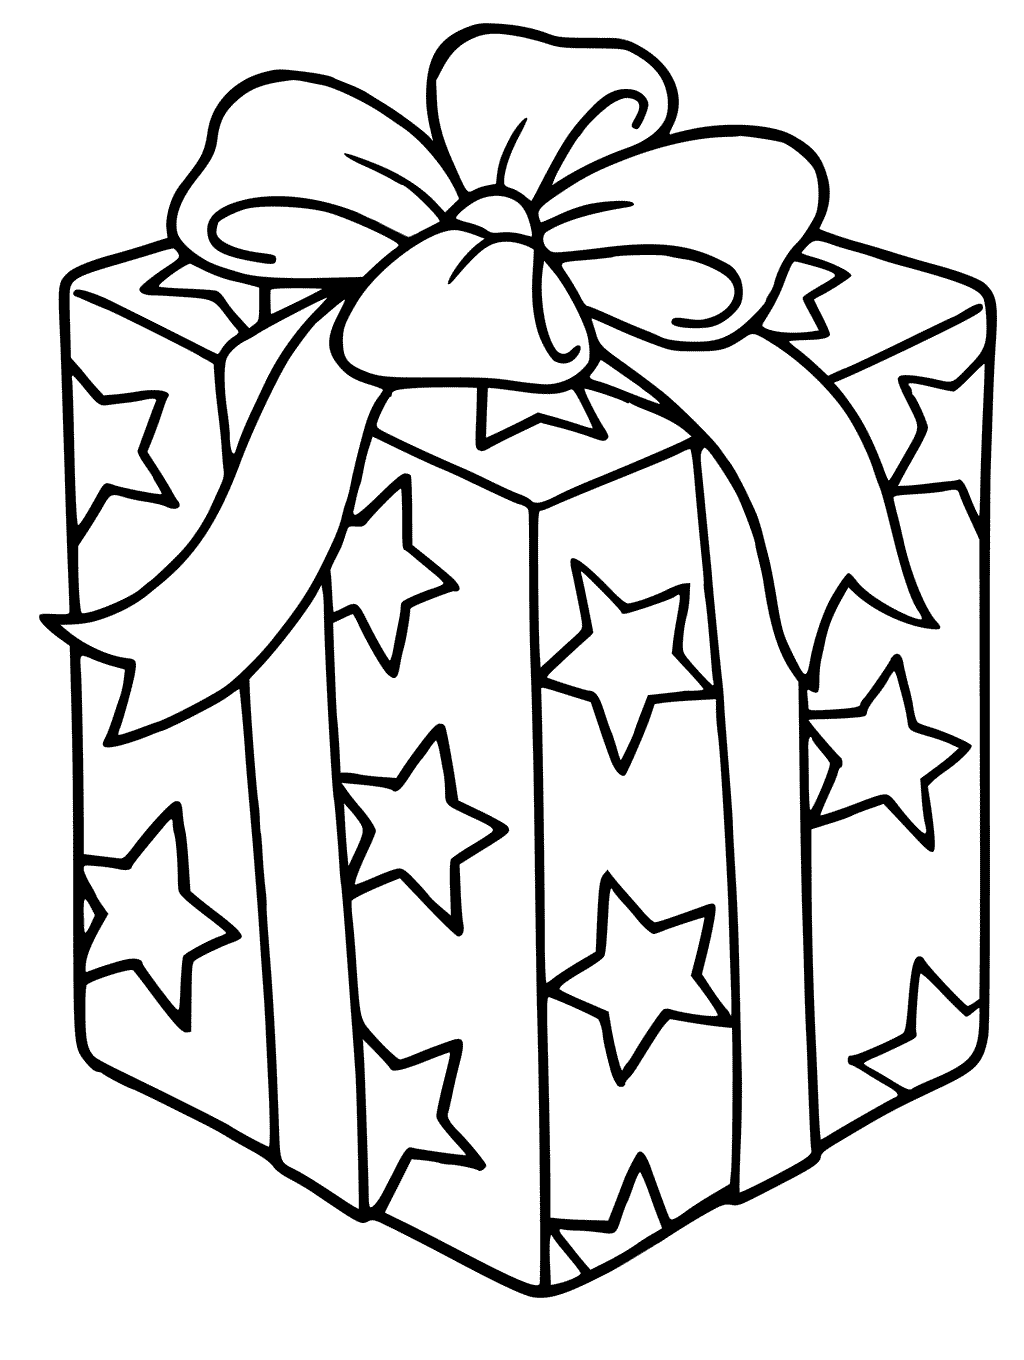 Presents Coloring Pages - Best Coloring Pages For Kids